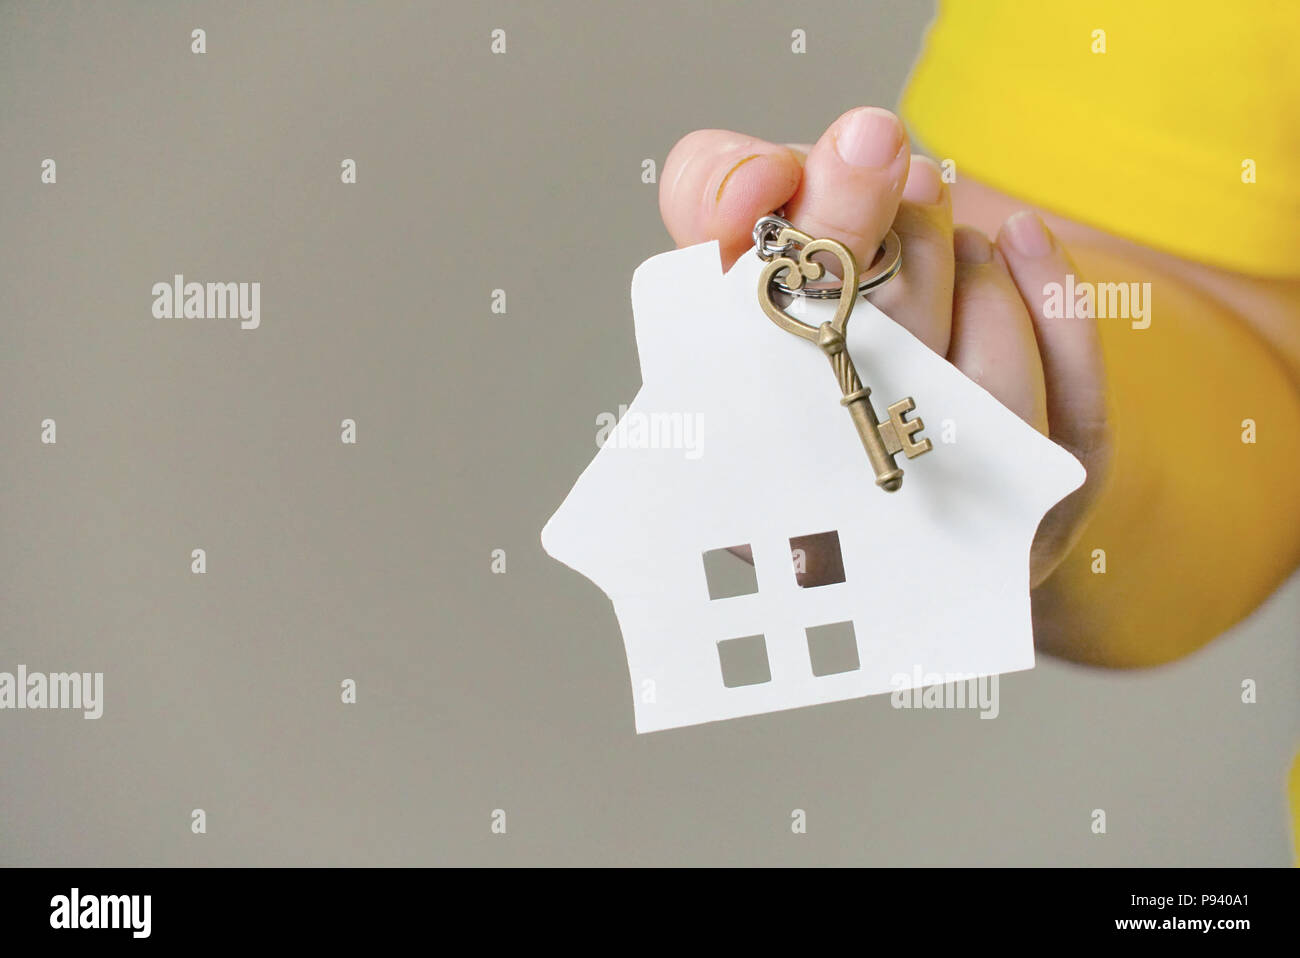 House owner wear yellow shirt holding house key on hand. Stock Photo